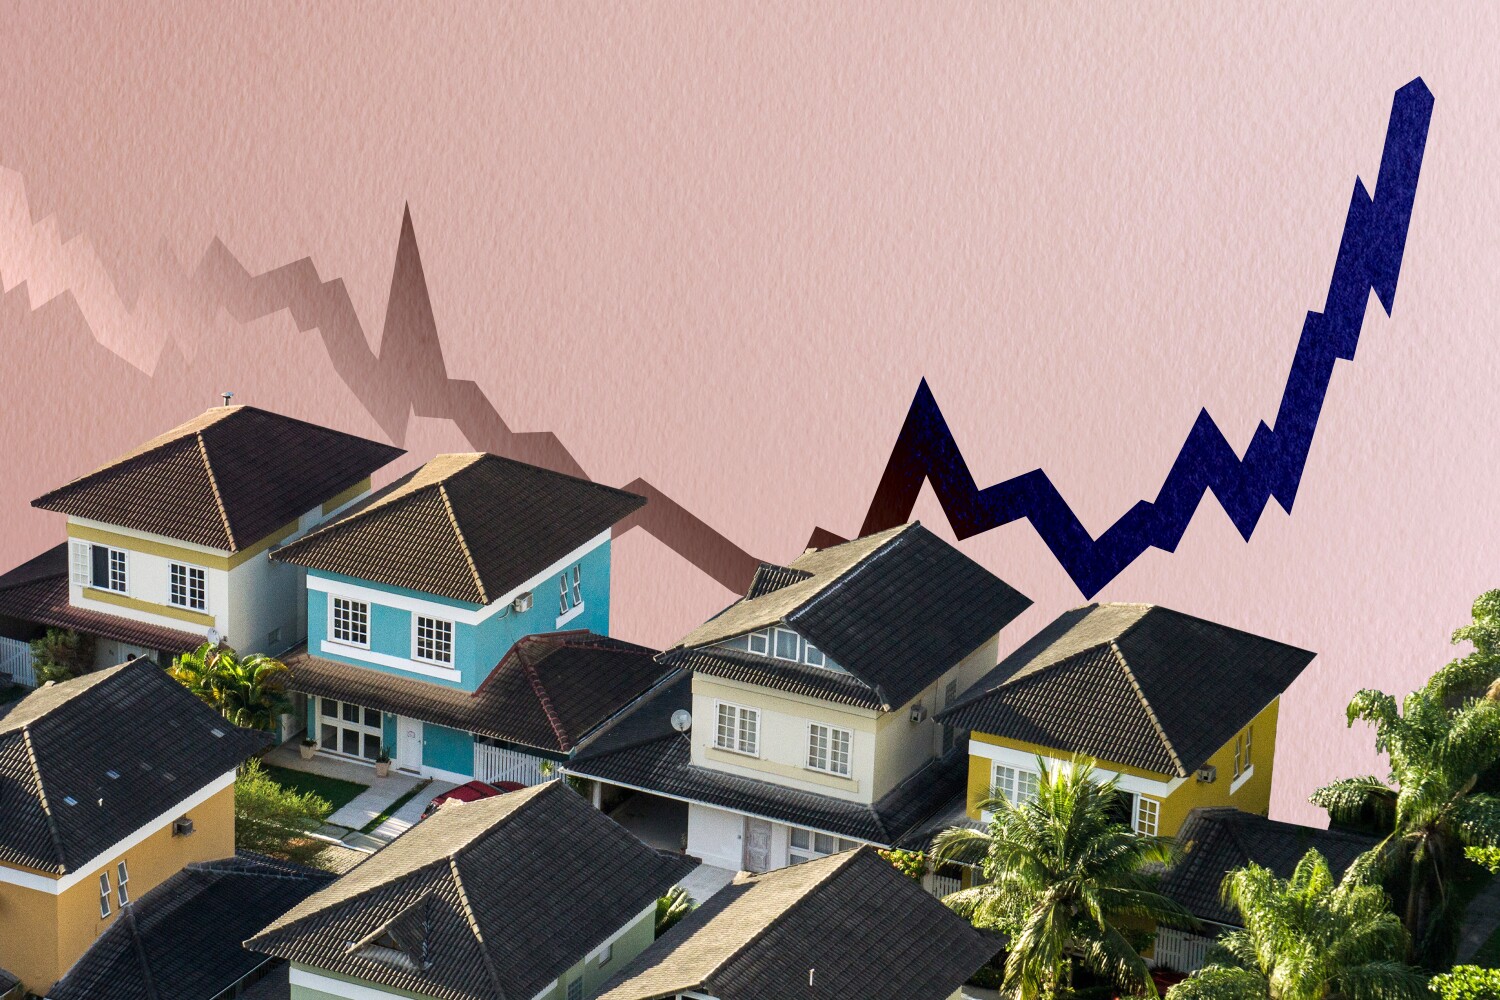 Mortgage rates are rising. Will that slow our out-of-control housing market?